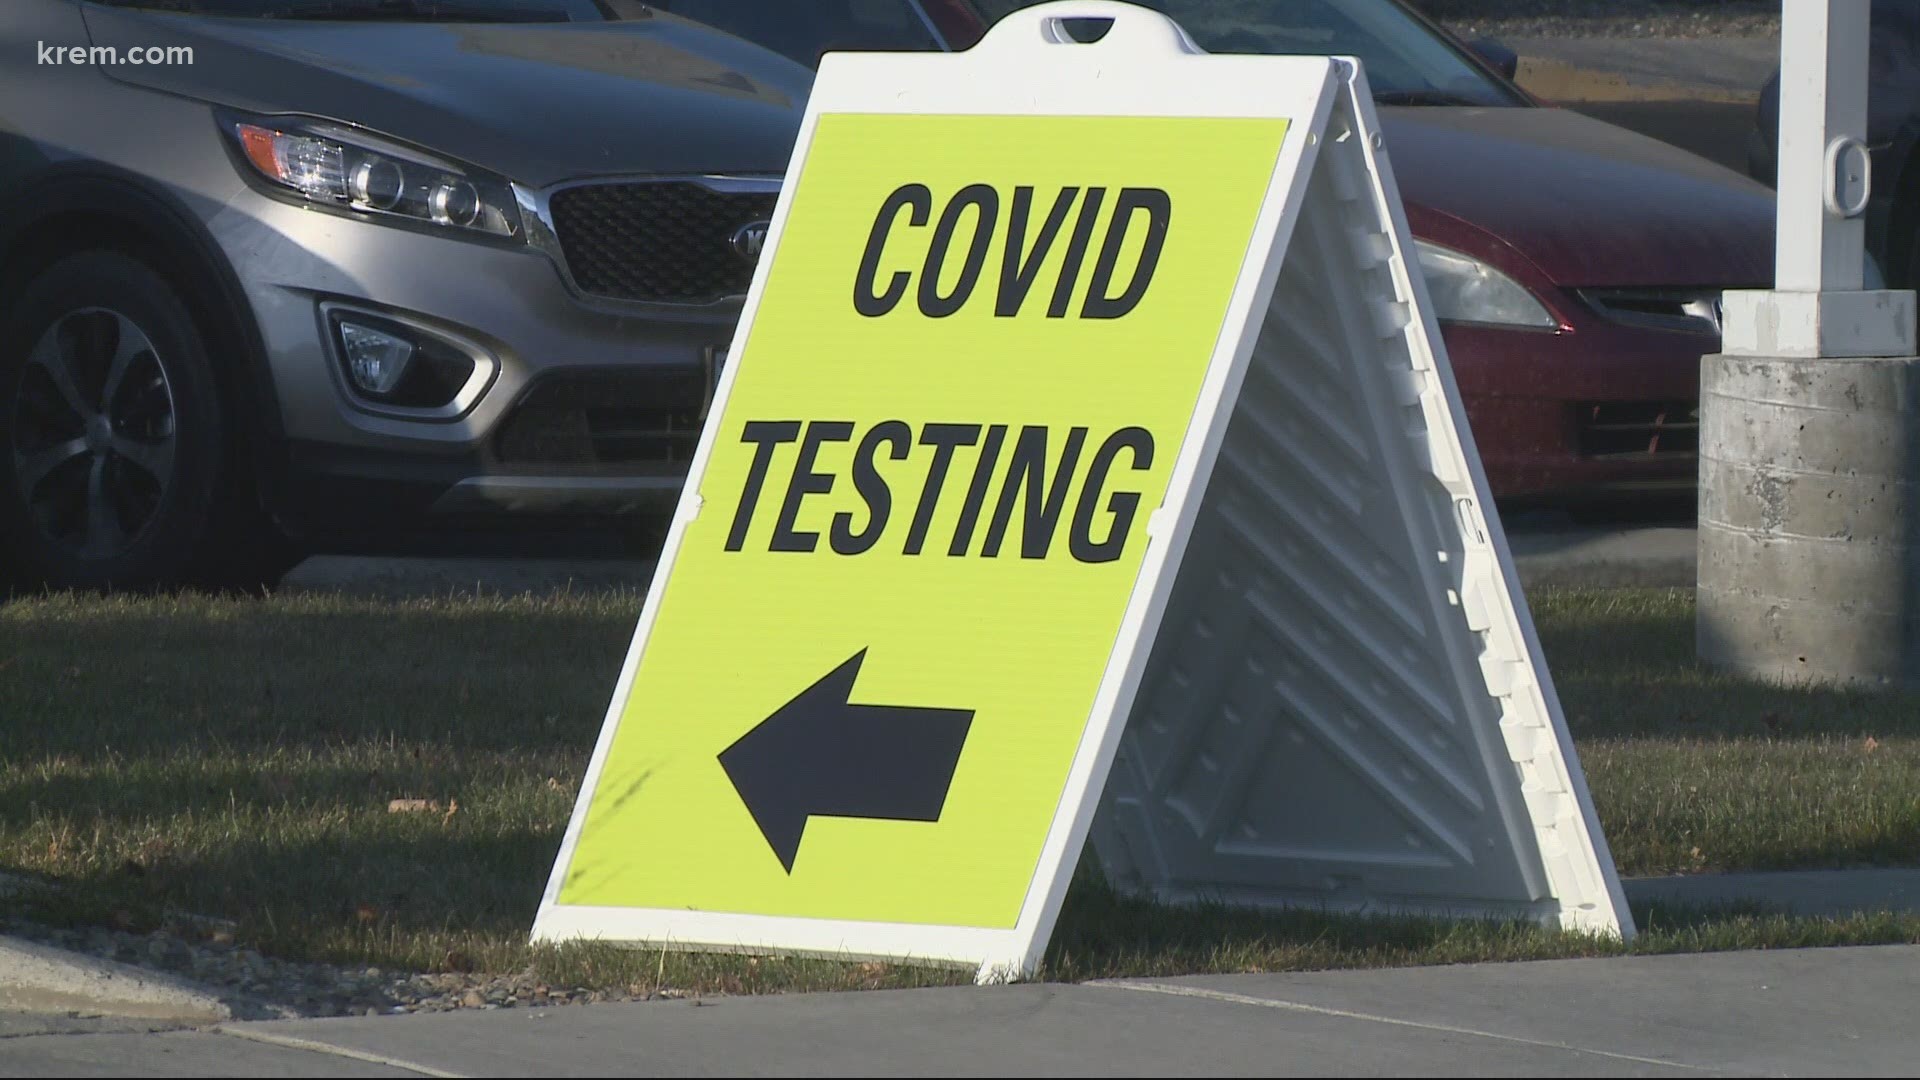 "Your choice to gather with those outside your household could lead to additional cases of COVID-19 and even death," the health district said.